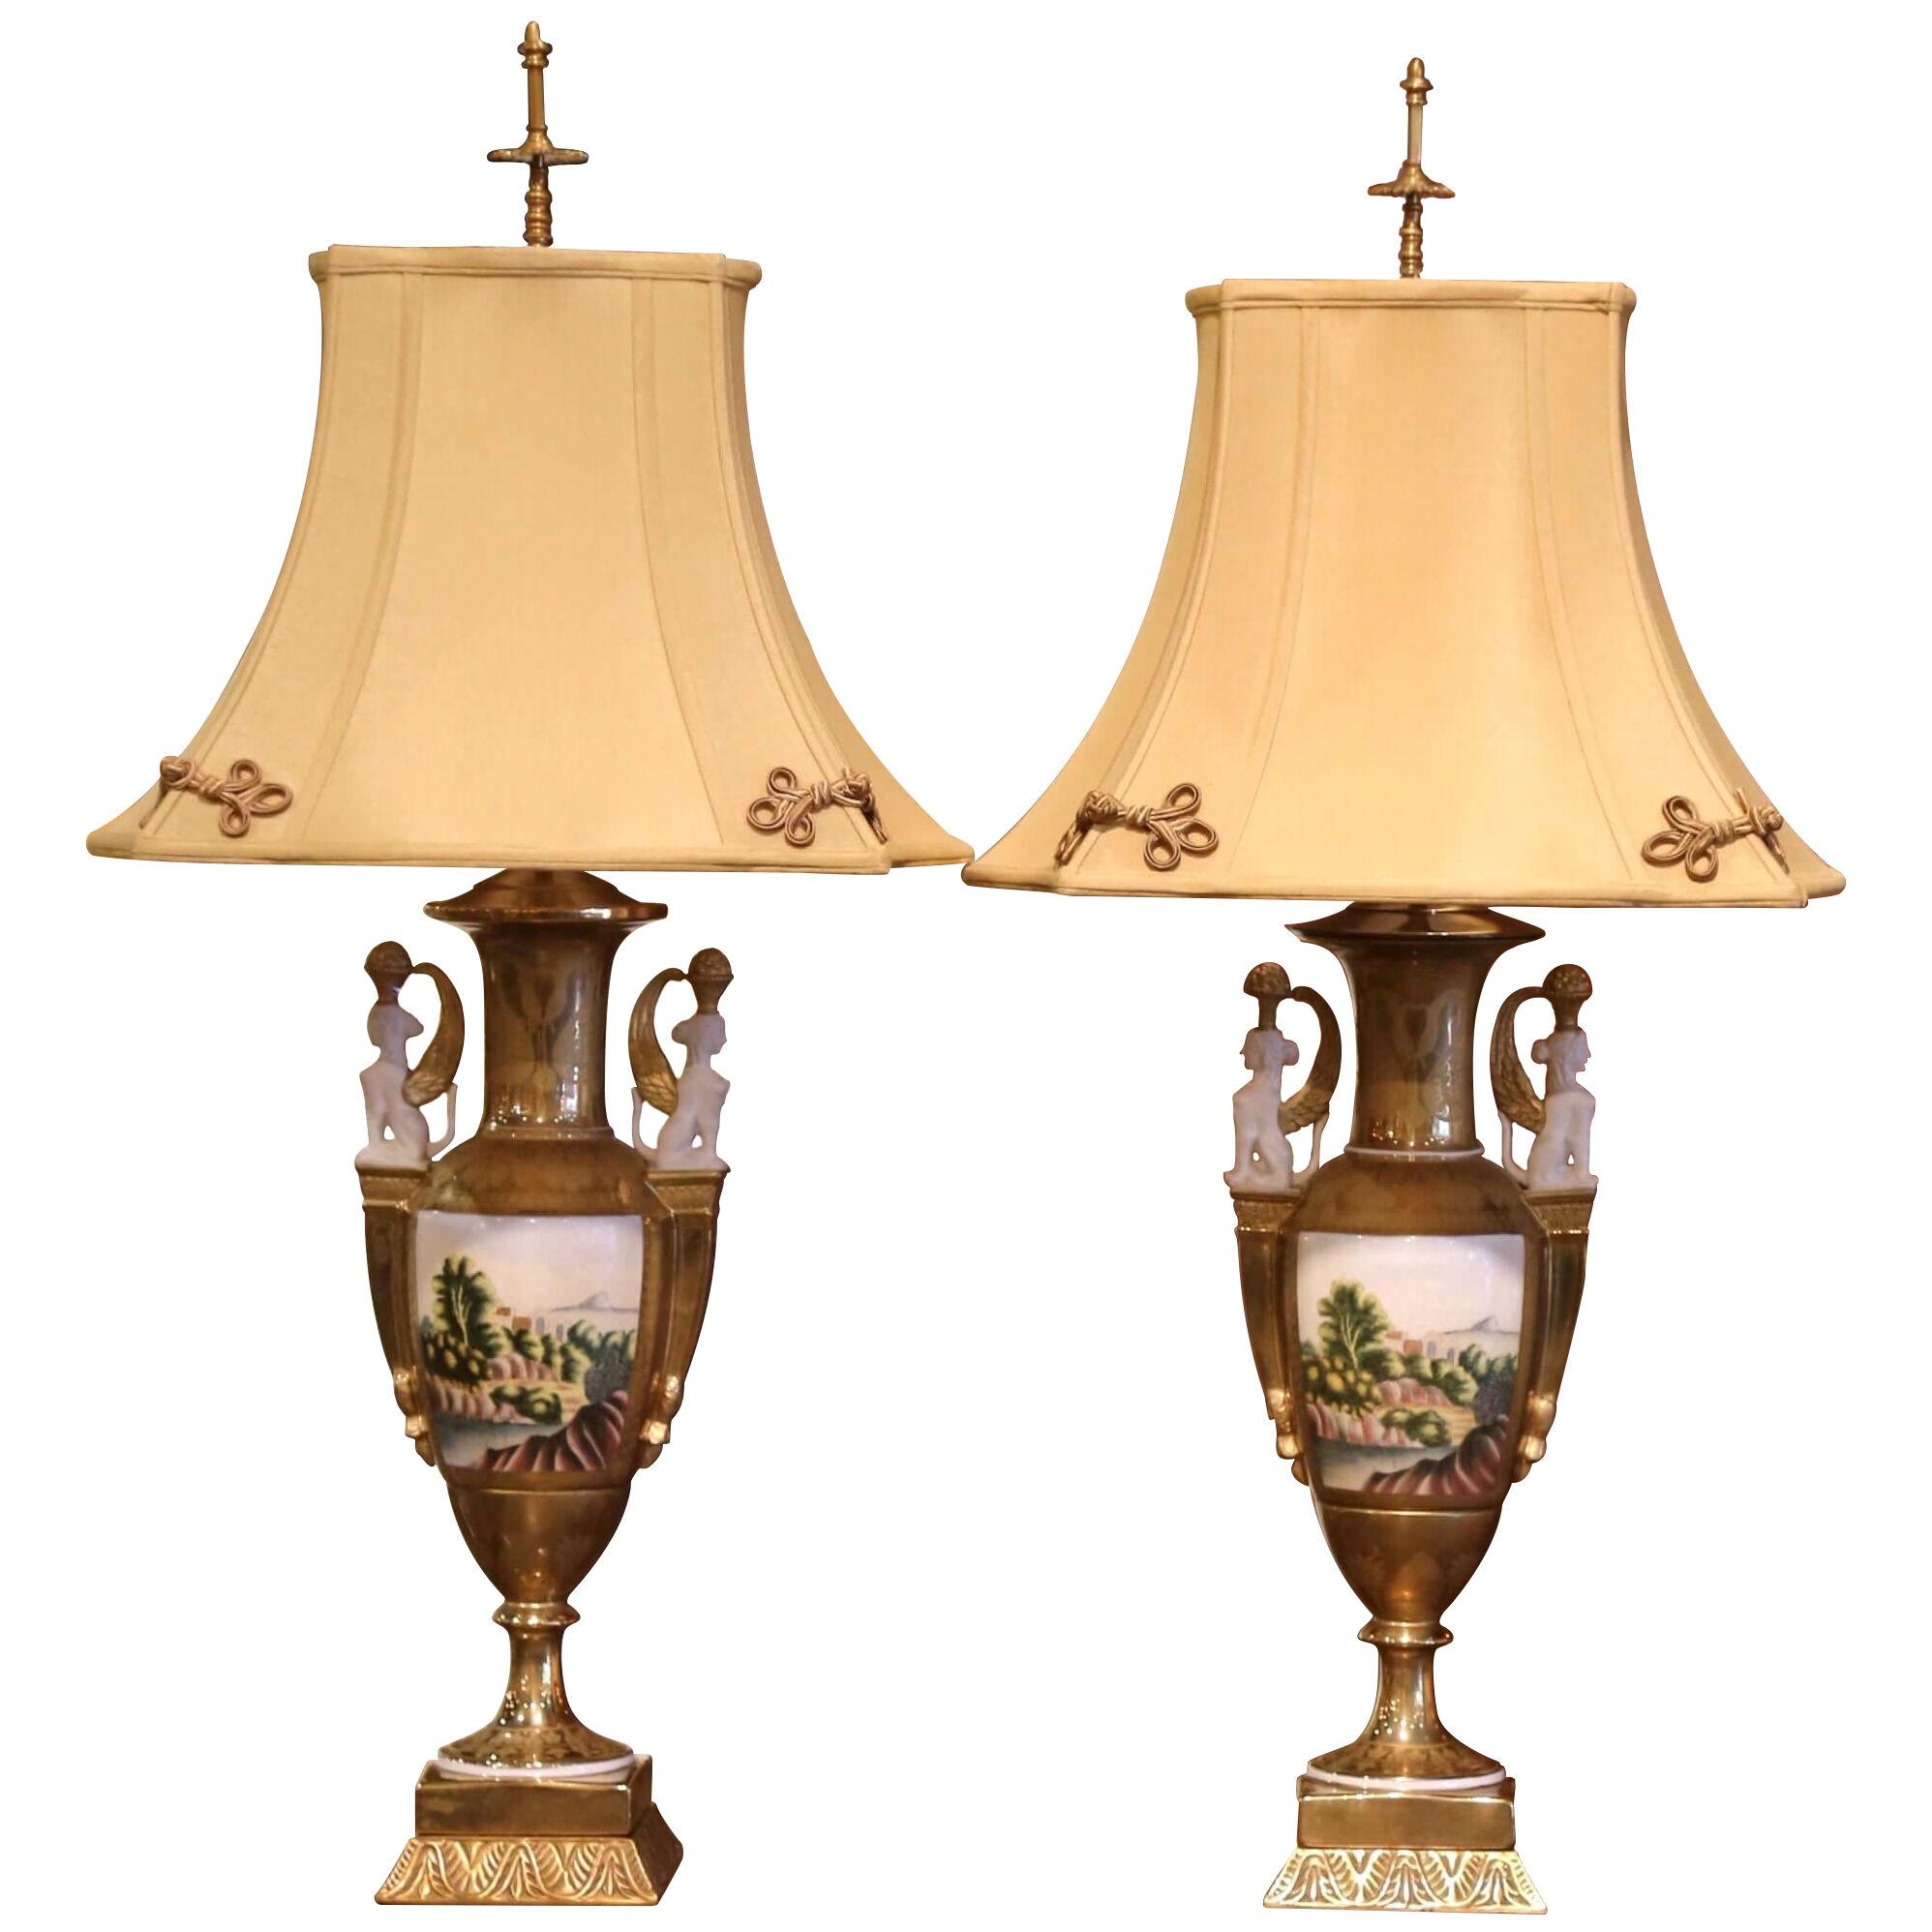 Pair of French Empire Style Painted and Gilt Porcelain Table Lamps w/ Shades